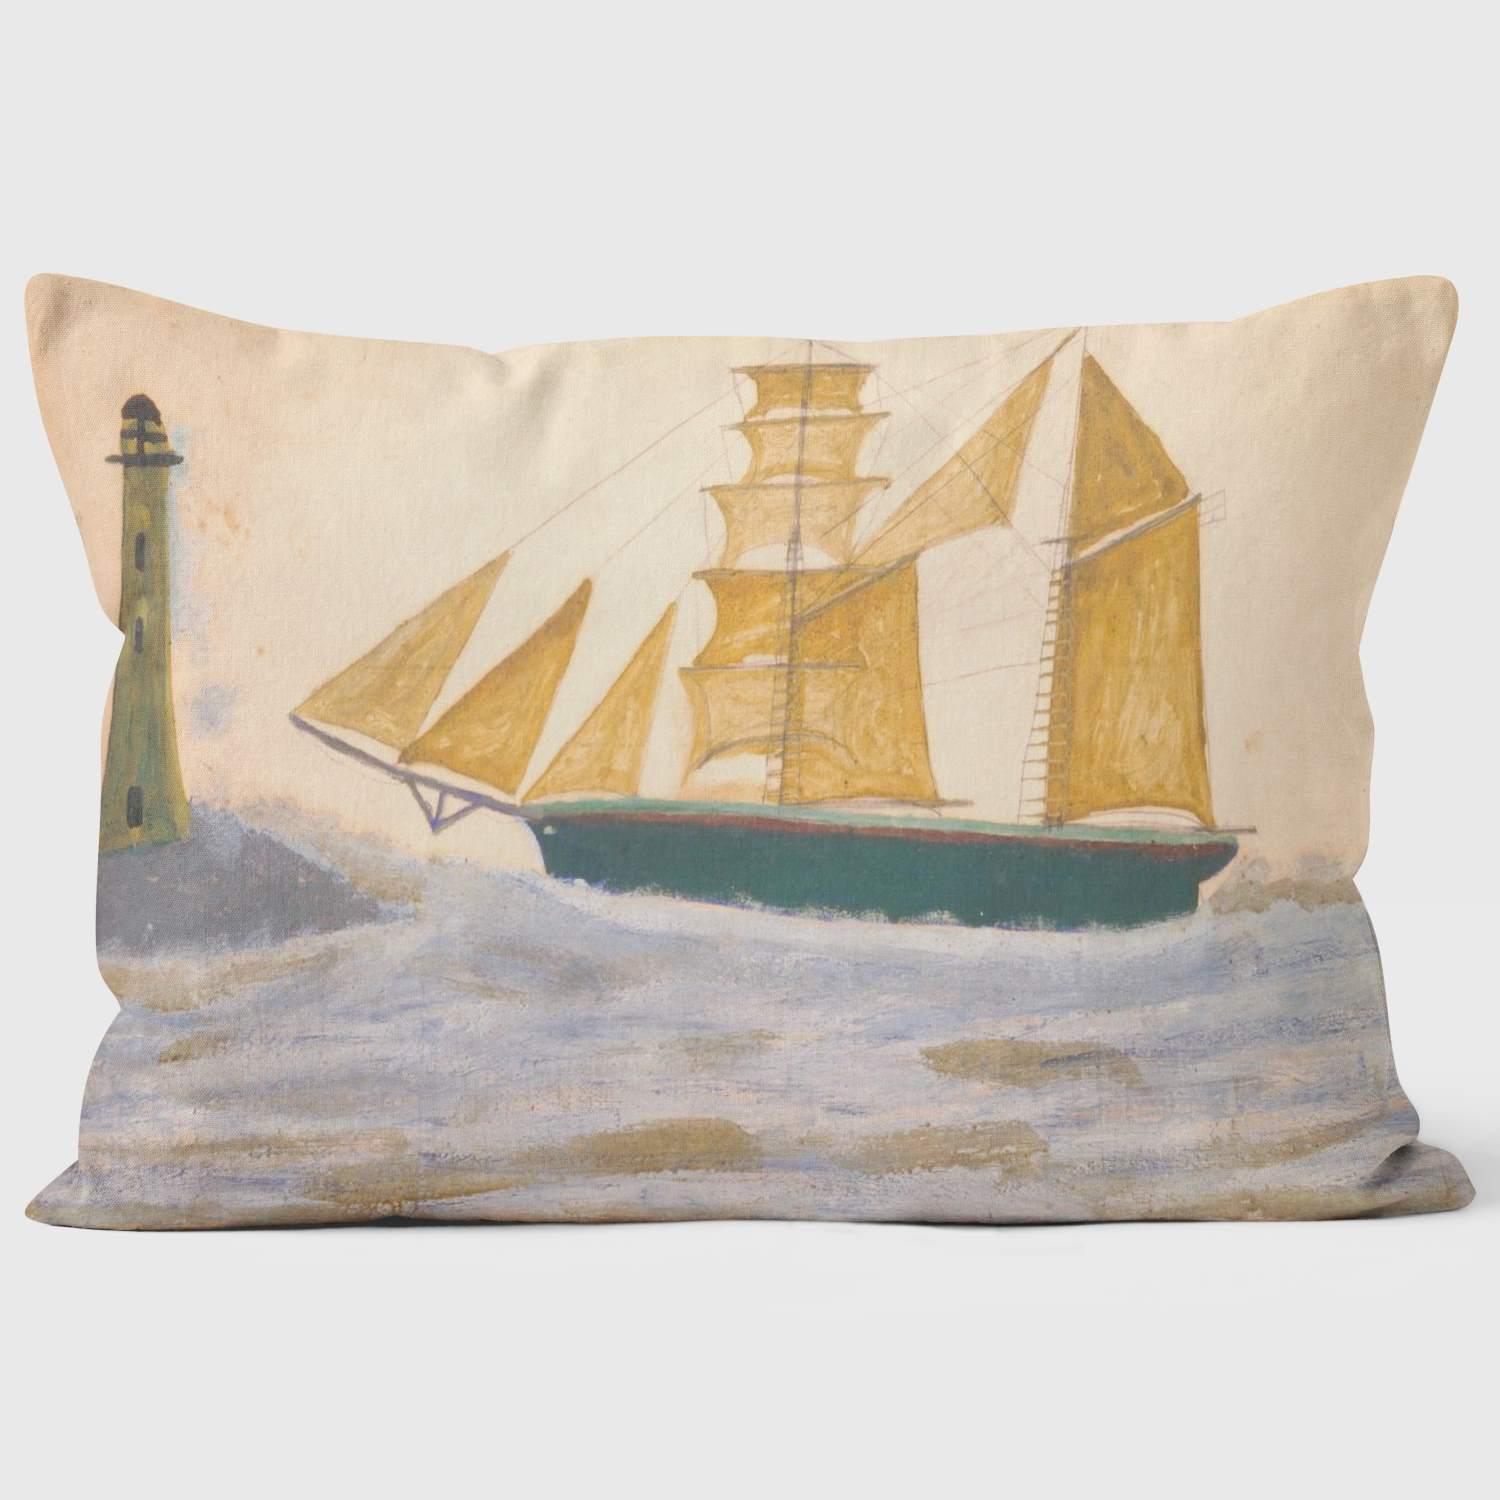 Two Masted Ship - Alfred WallisTate - St.Ives Cushion - Handmade Cushions UK - WeLoveCushions